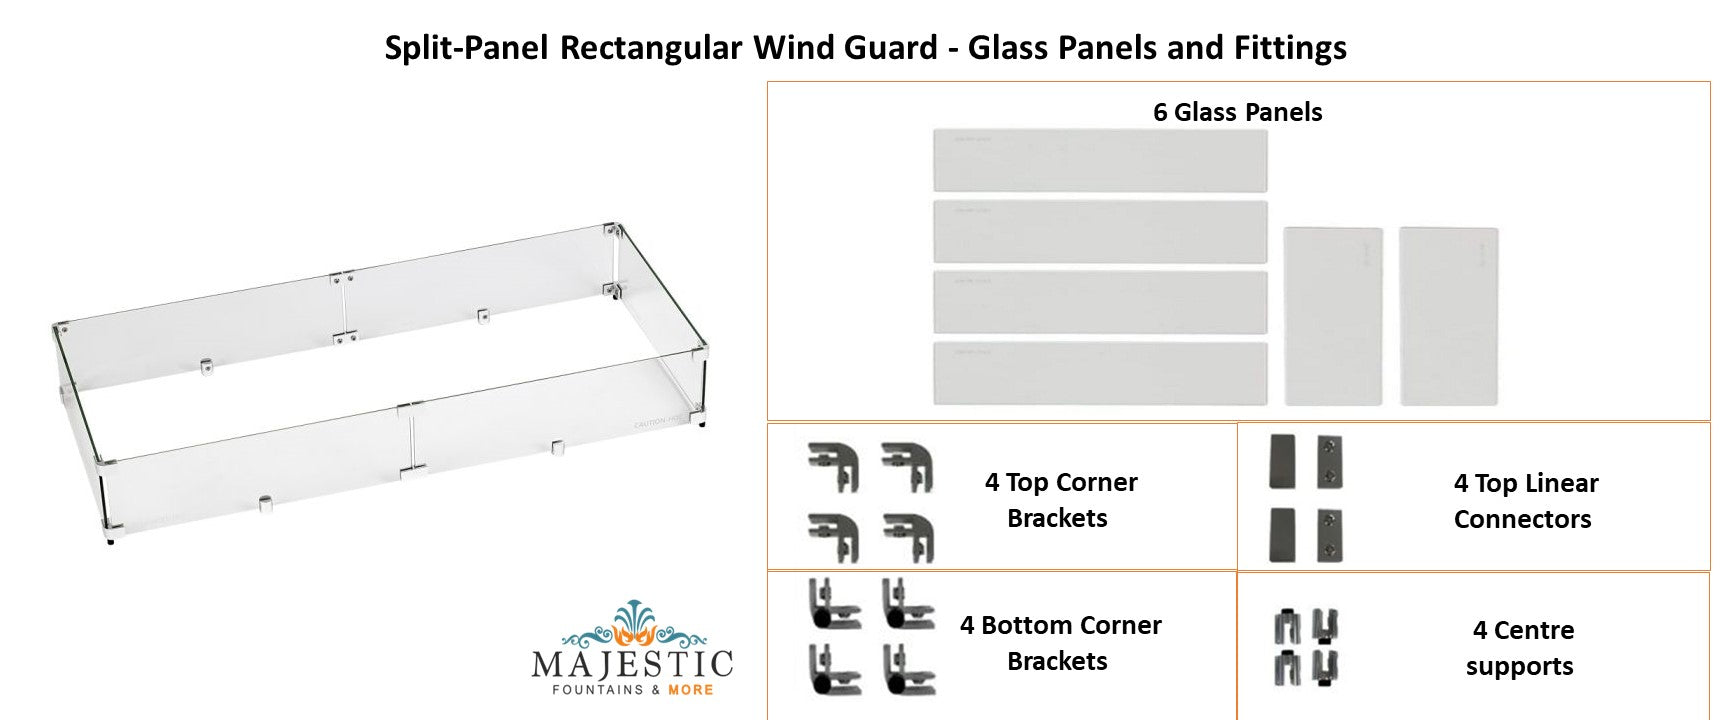 Rectangular Wind Guard - Glass Panels and Fittings - Majestic Fountains and More